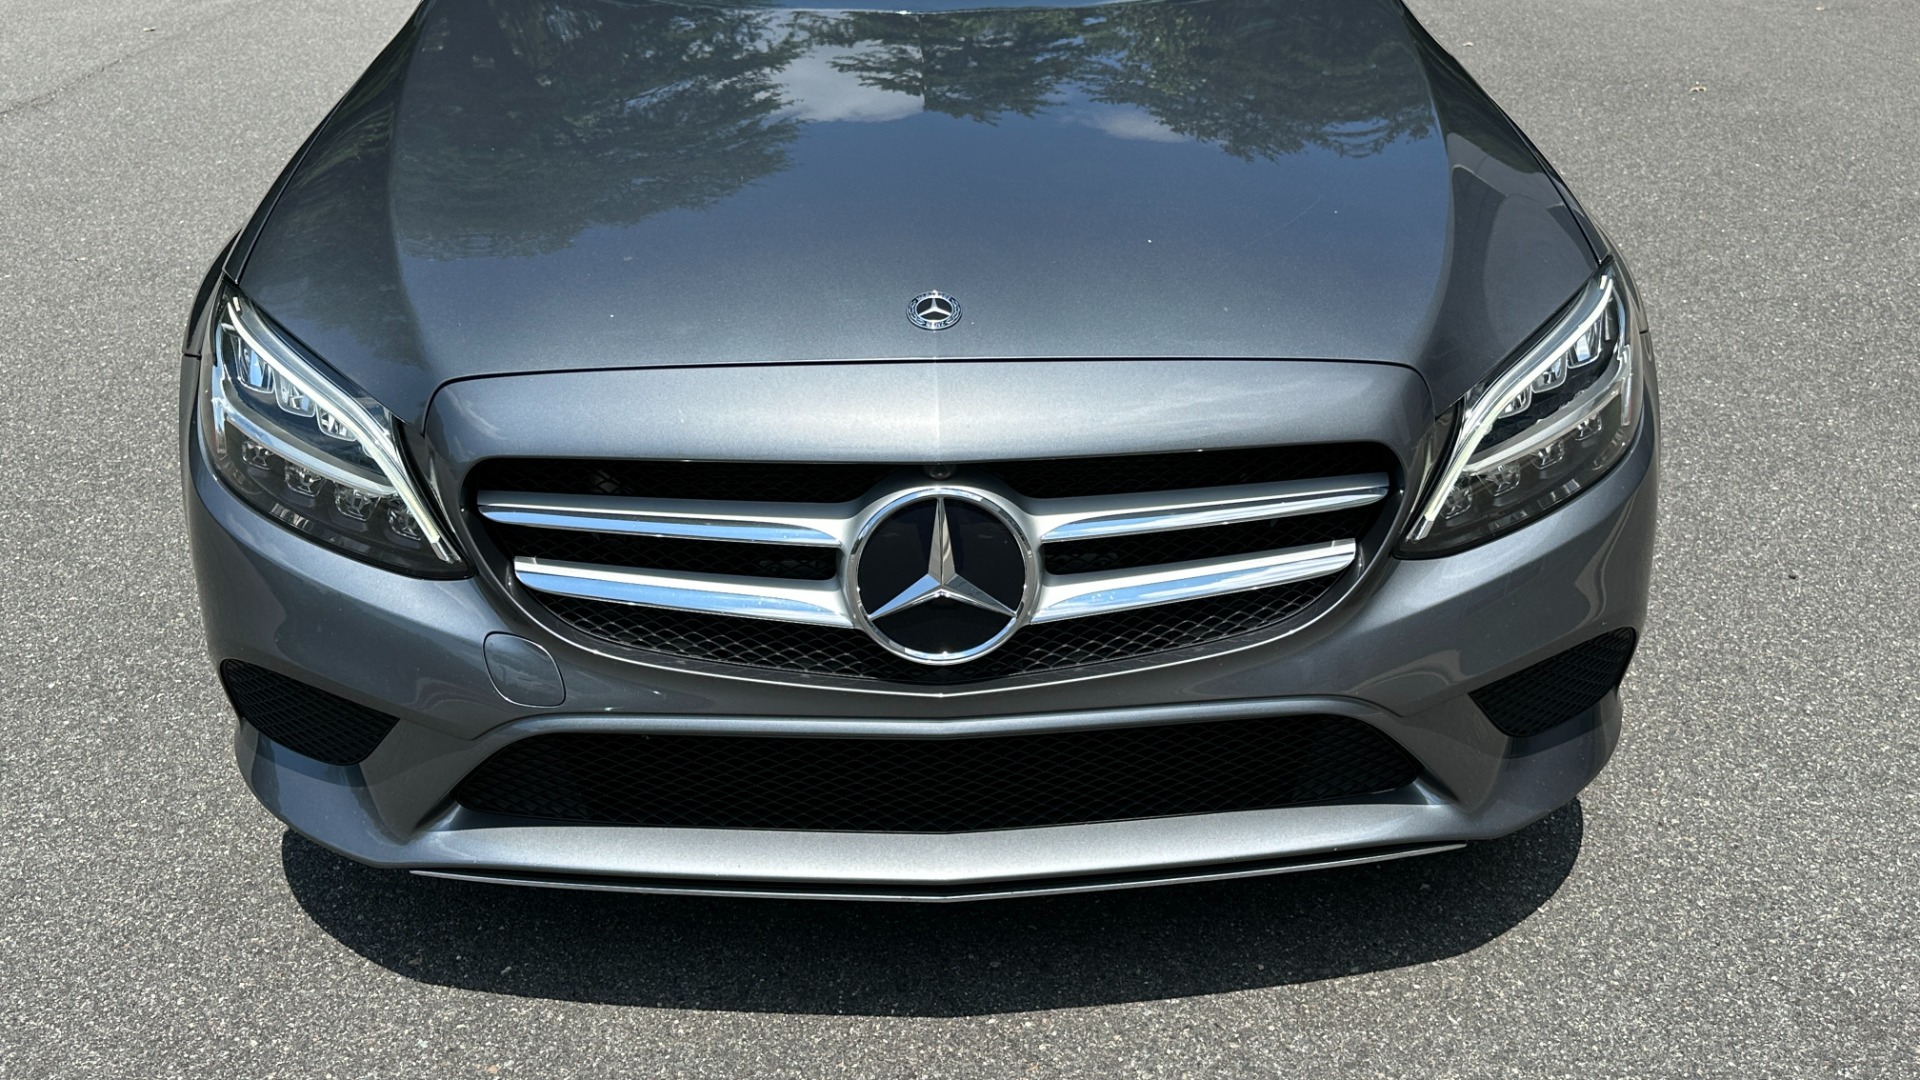 Used 2019 Mercedes-Benz C-Class C300 / PREMIUM / AMBIENT LIGHTS / BLIND SPOT / 10.25IN DISPLAY for sale $27,595 at Formula Imports in Charlotte NC 28227 9